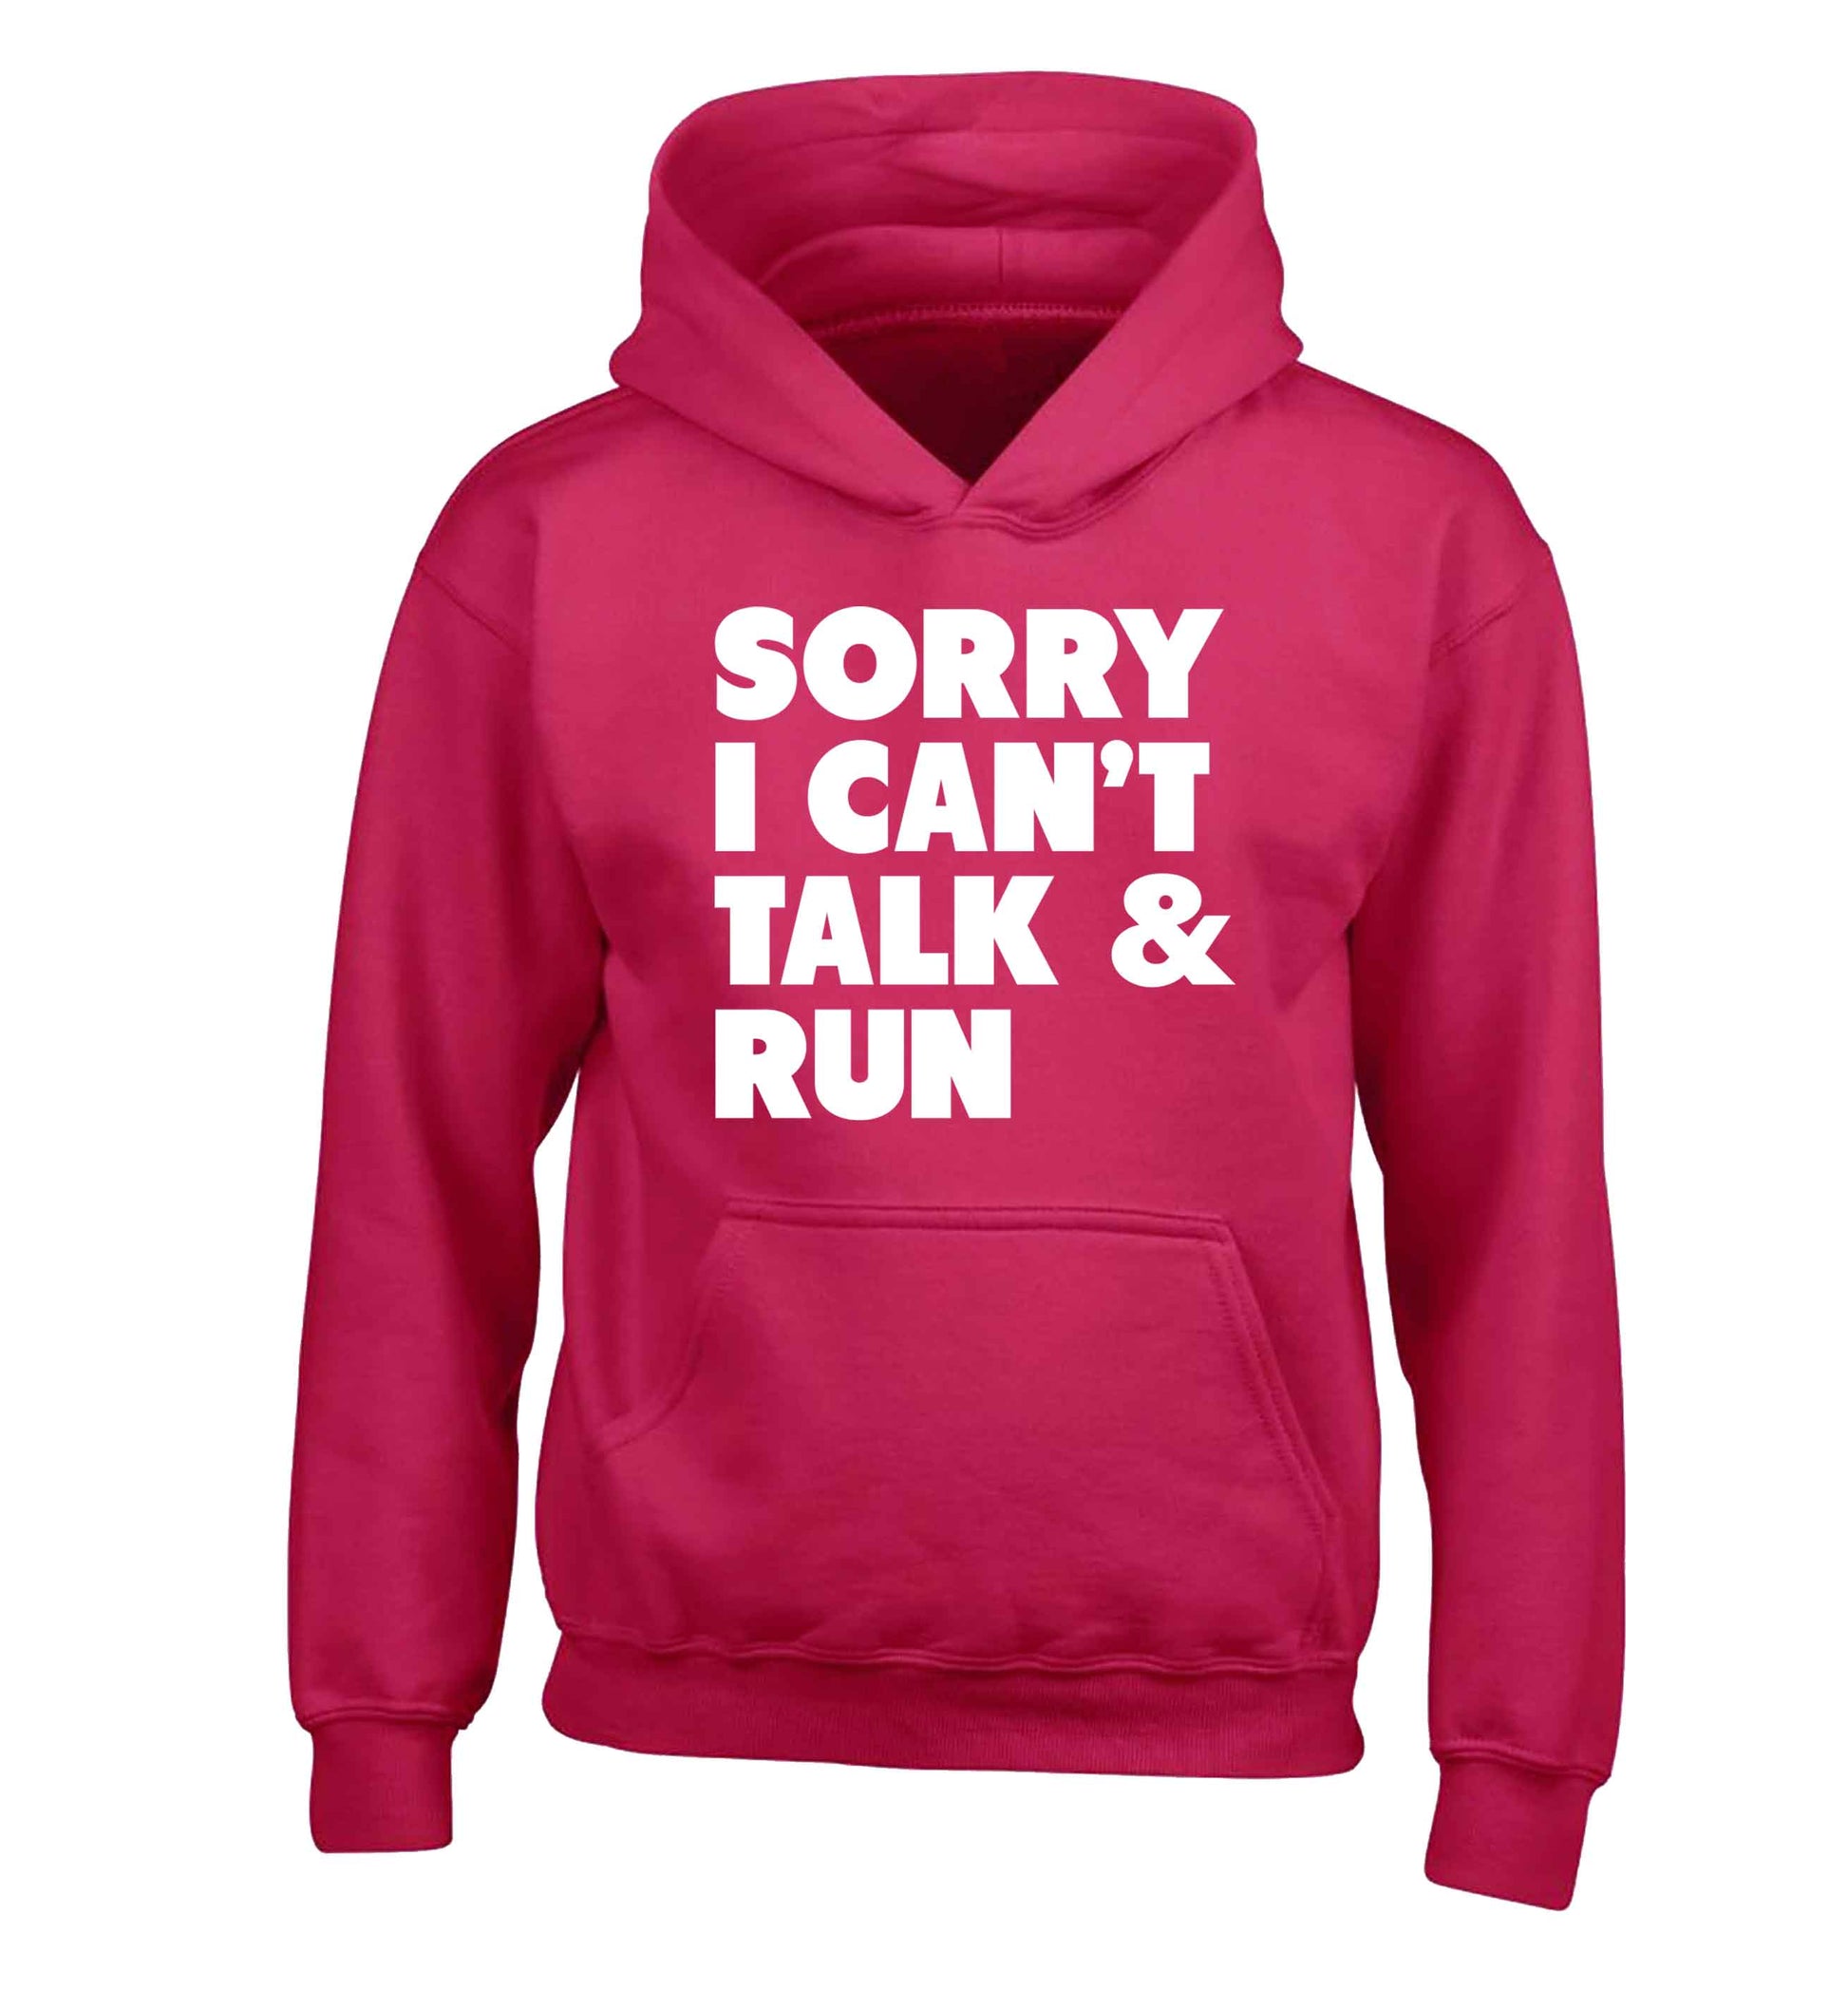 Sorry I can't talk and run children's pink hoodie 12-13 Years